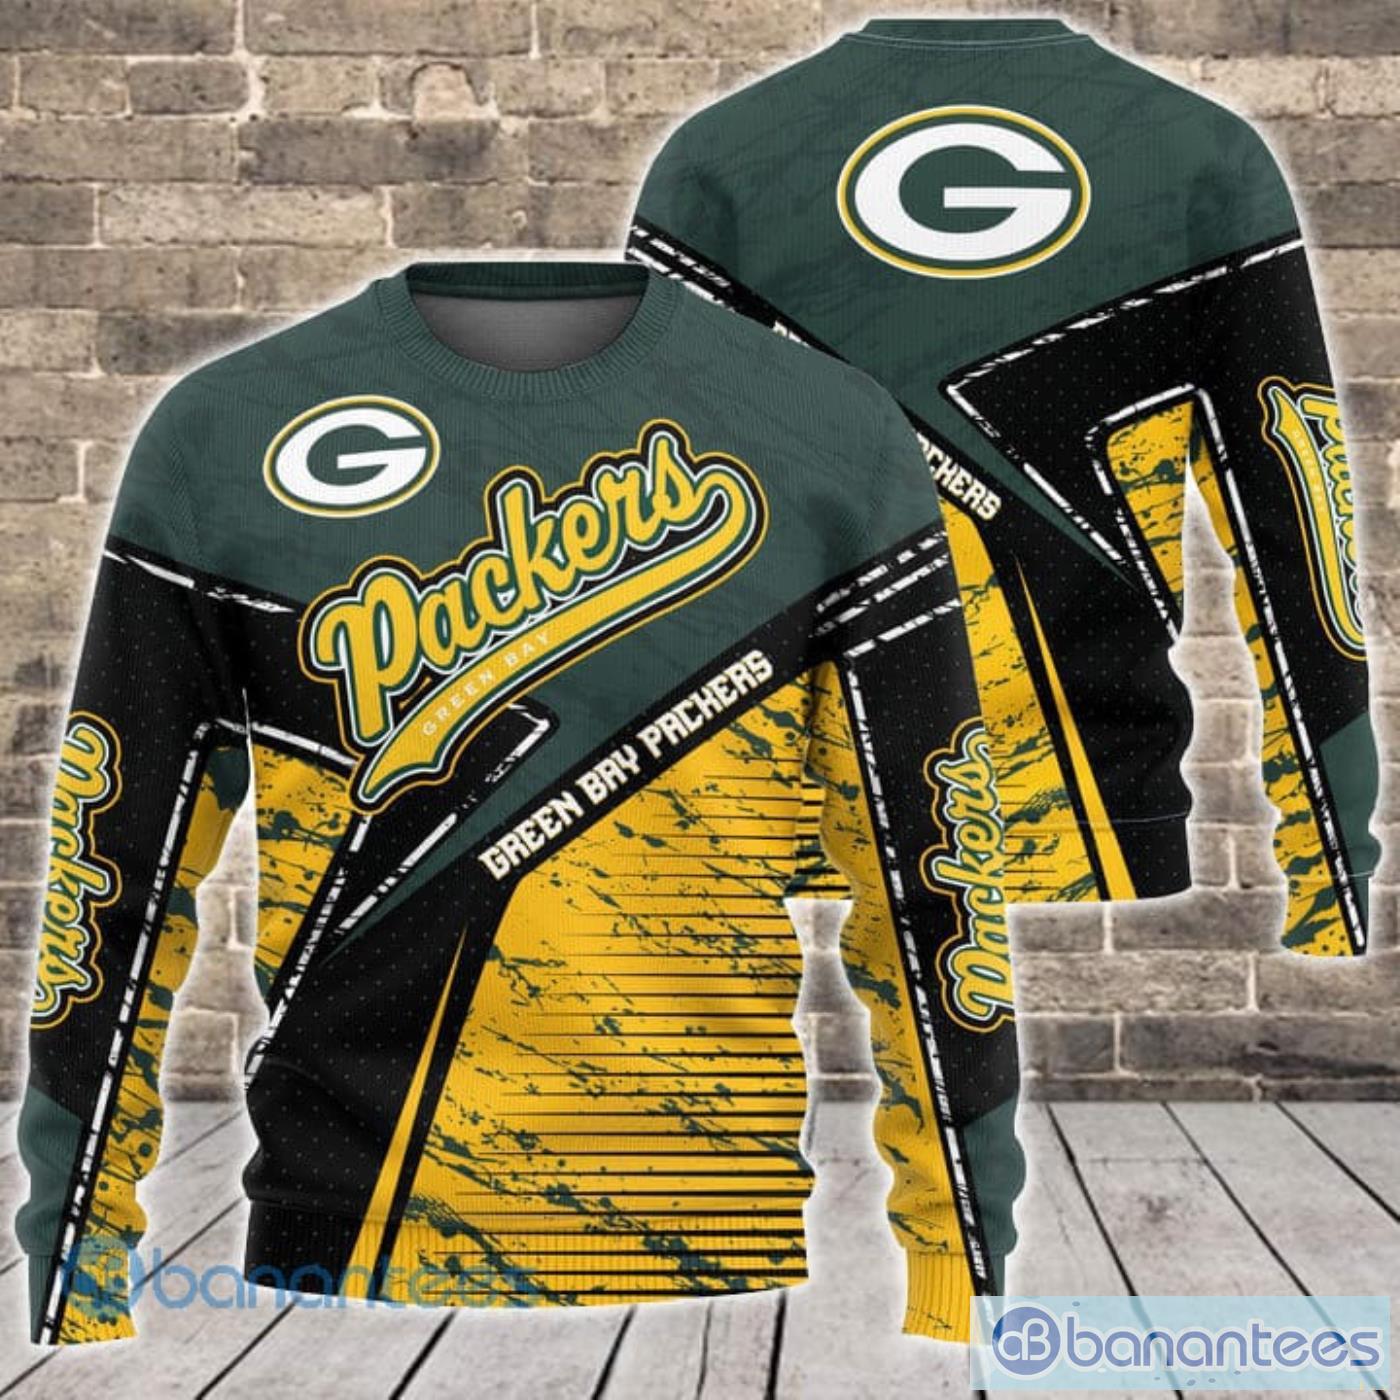 Green Bay Packers Nfl All Over Printed 3D Shirt For Fans - Banantees